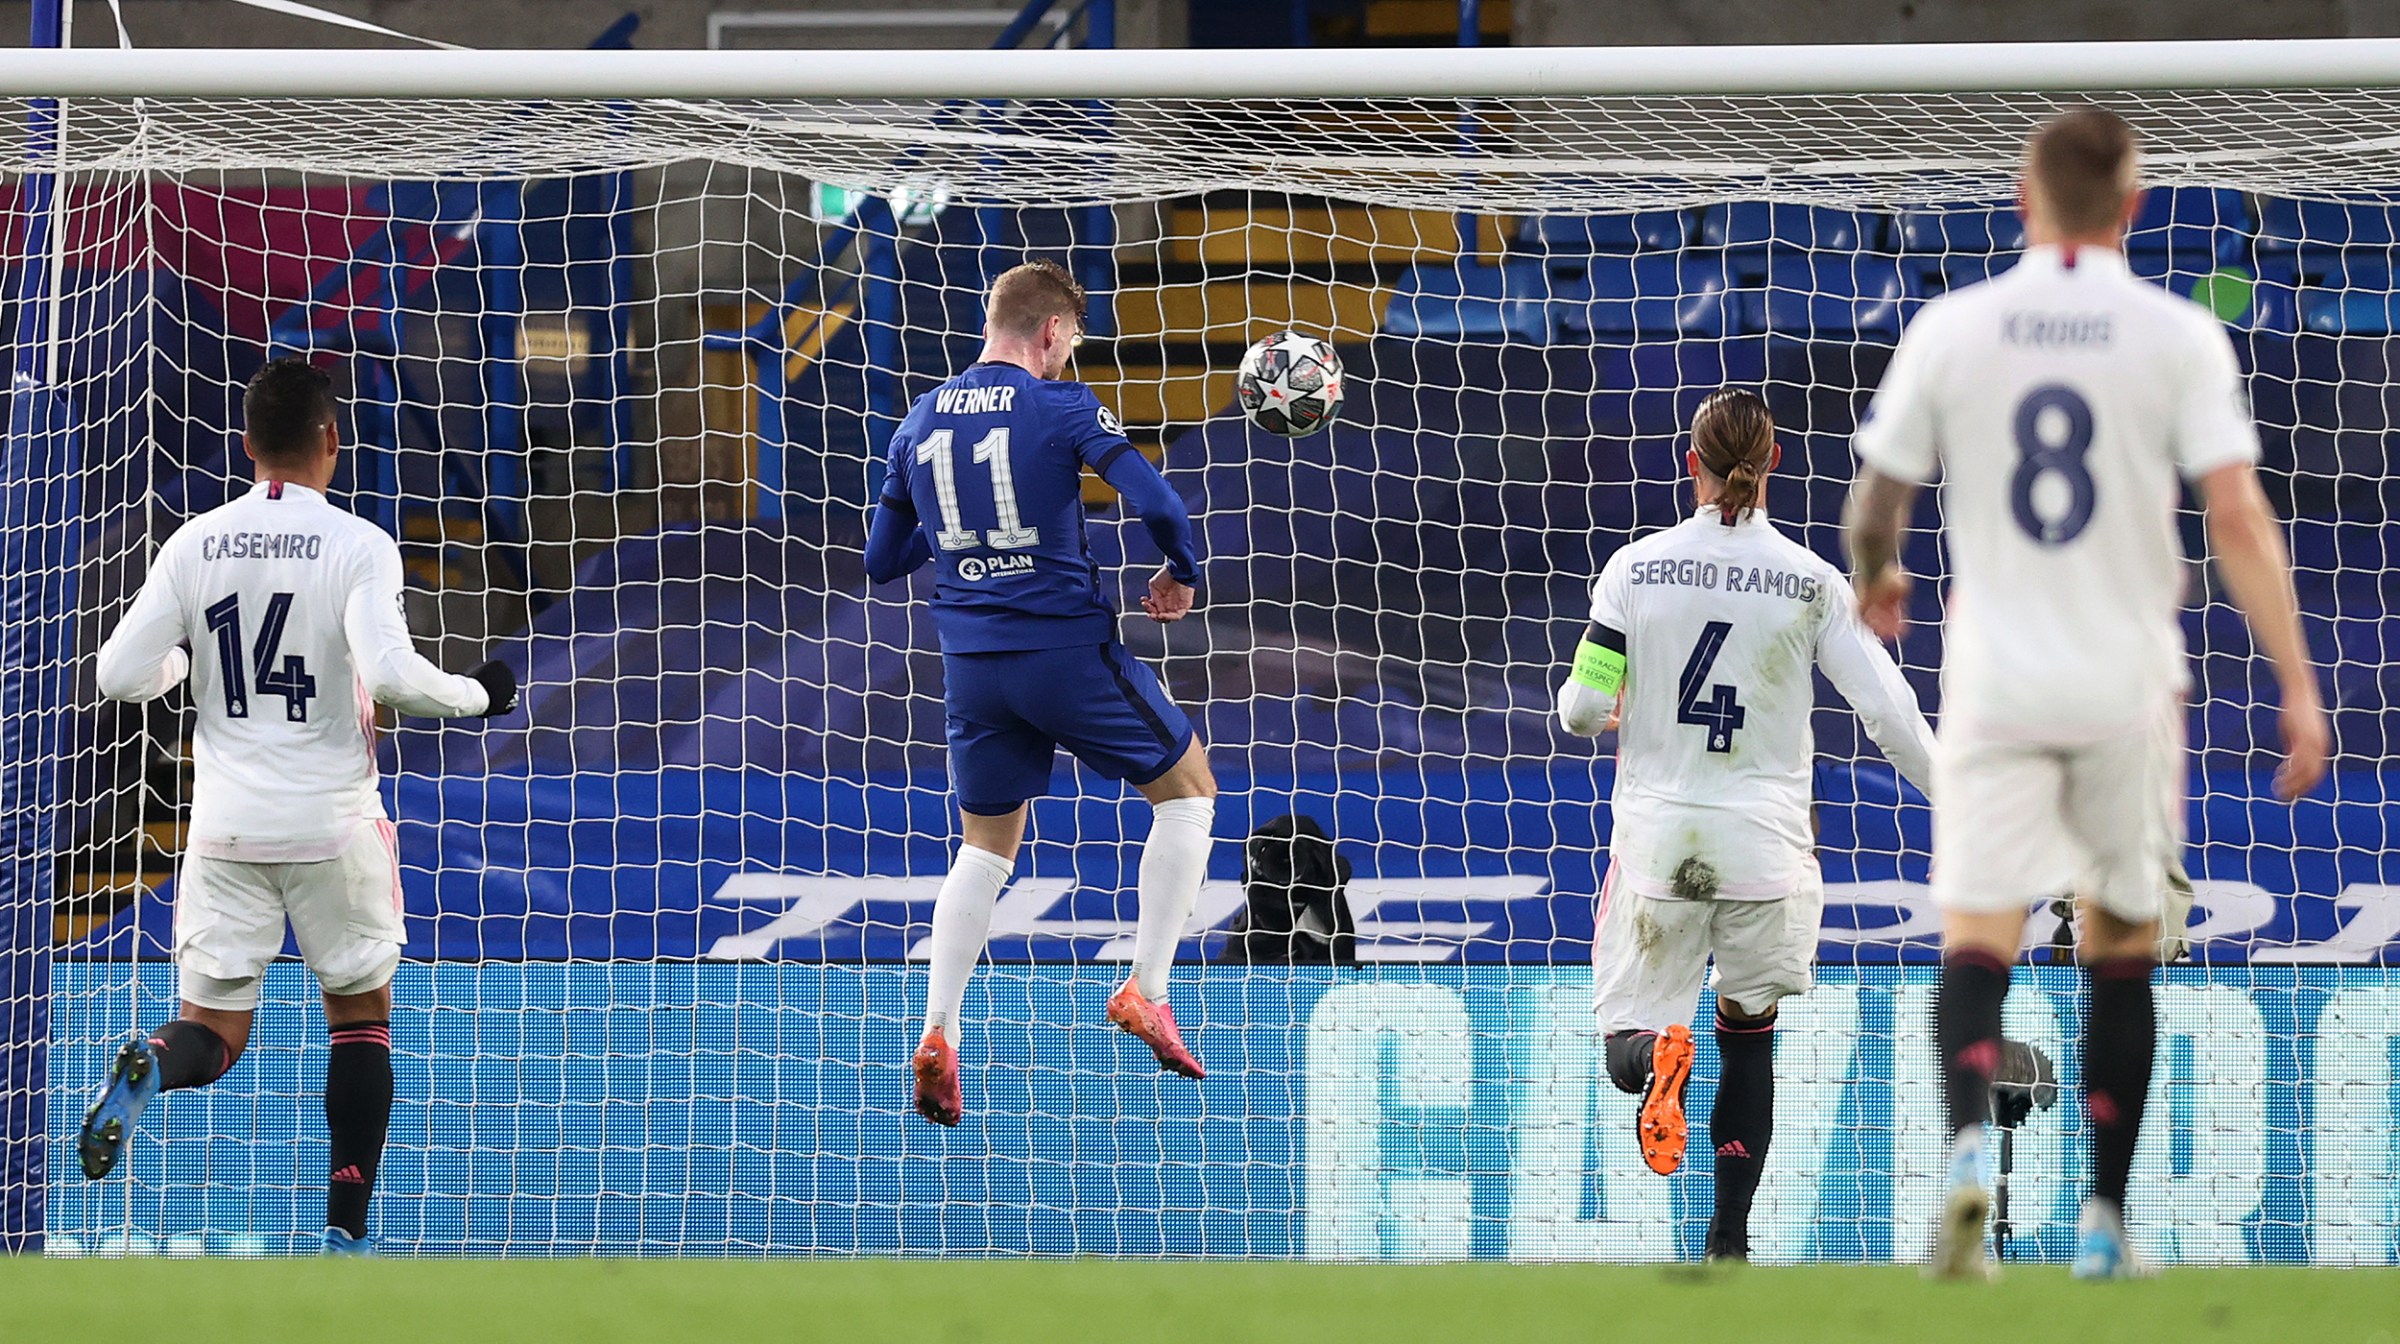 Timo Werner of Chelsea scores his team's first goal during the UEFA Champions League Semi Final Second Leg match between Chelsea and Real Madrid at Stamford Bridge on May 05, 2021 in London, England